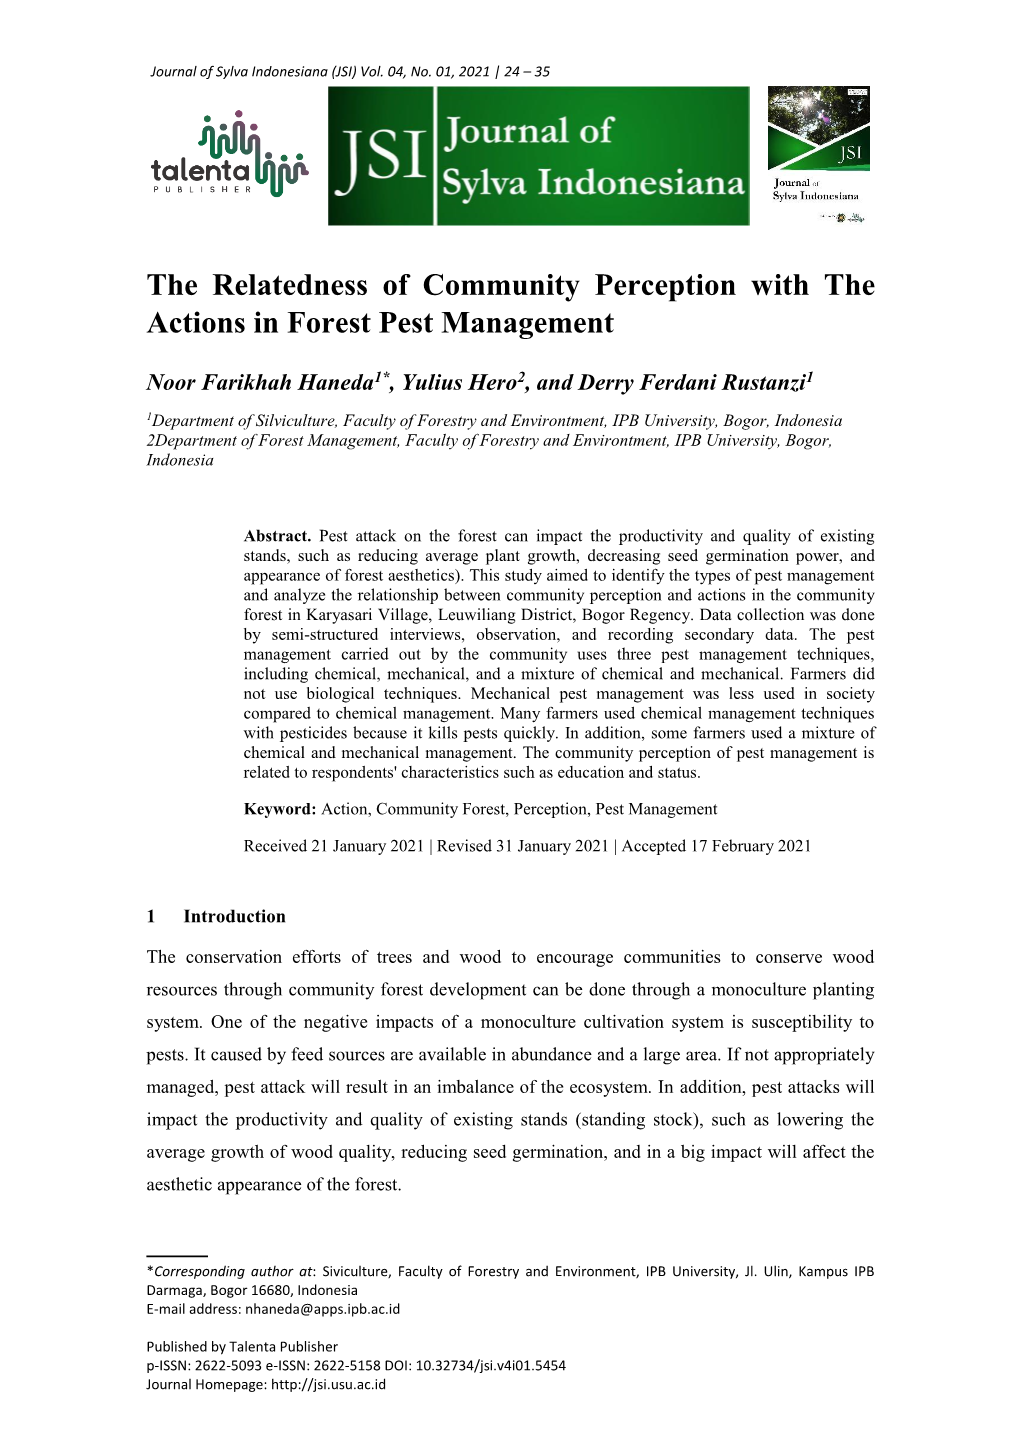 The Relatedness of Community Perception with the Actions in Forest Pest Management